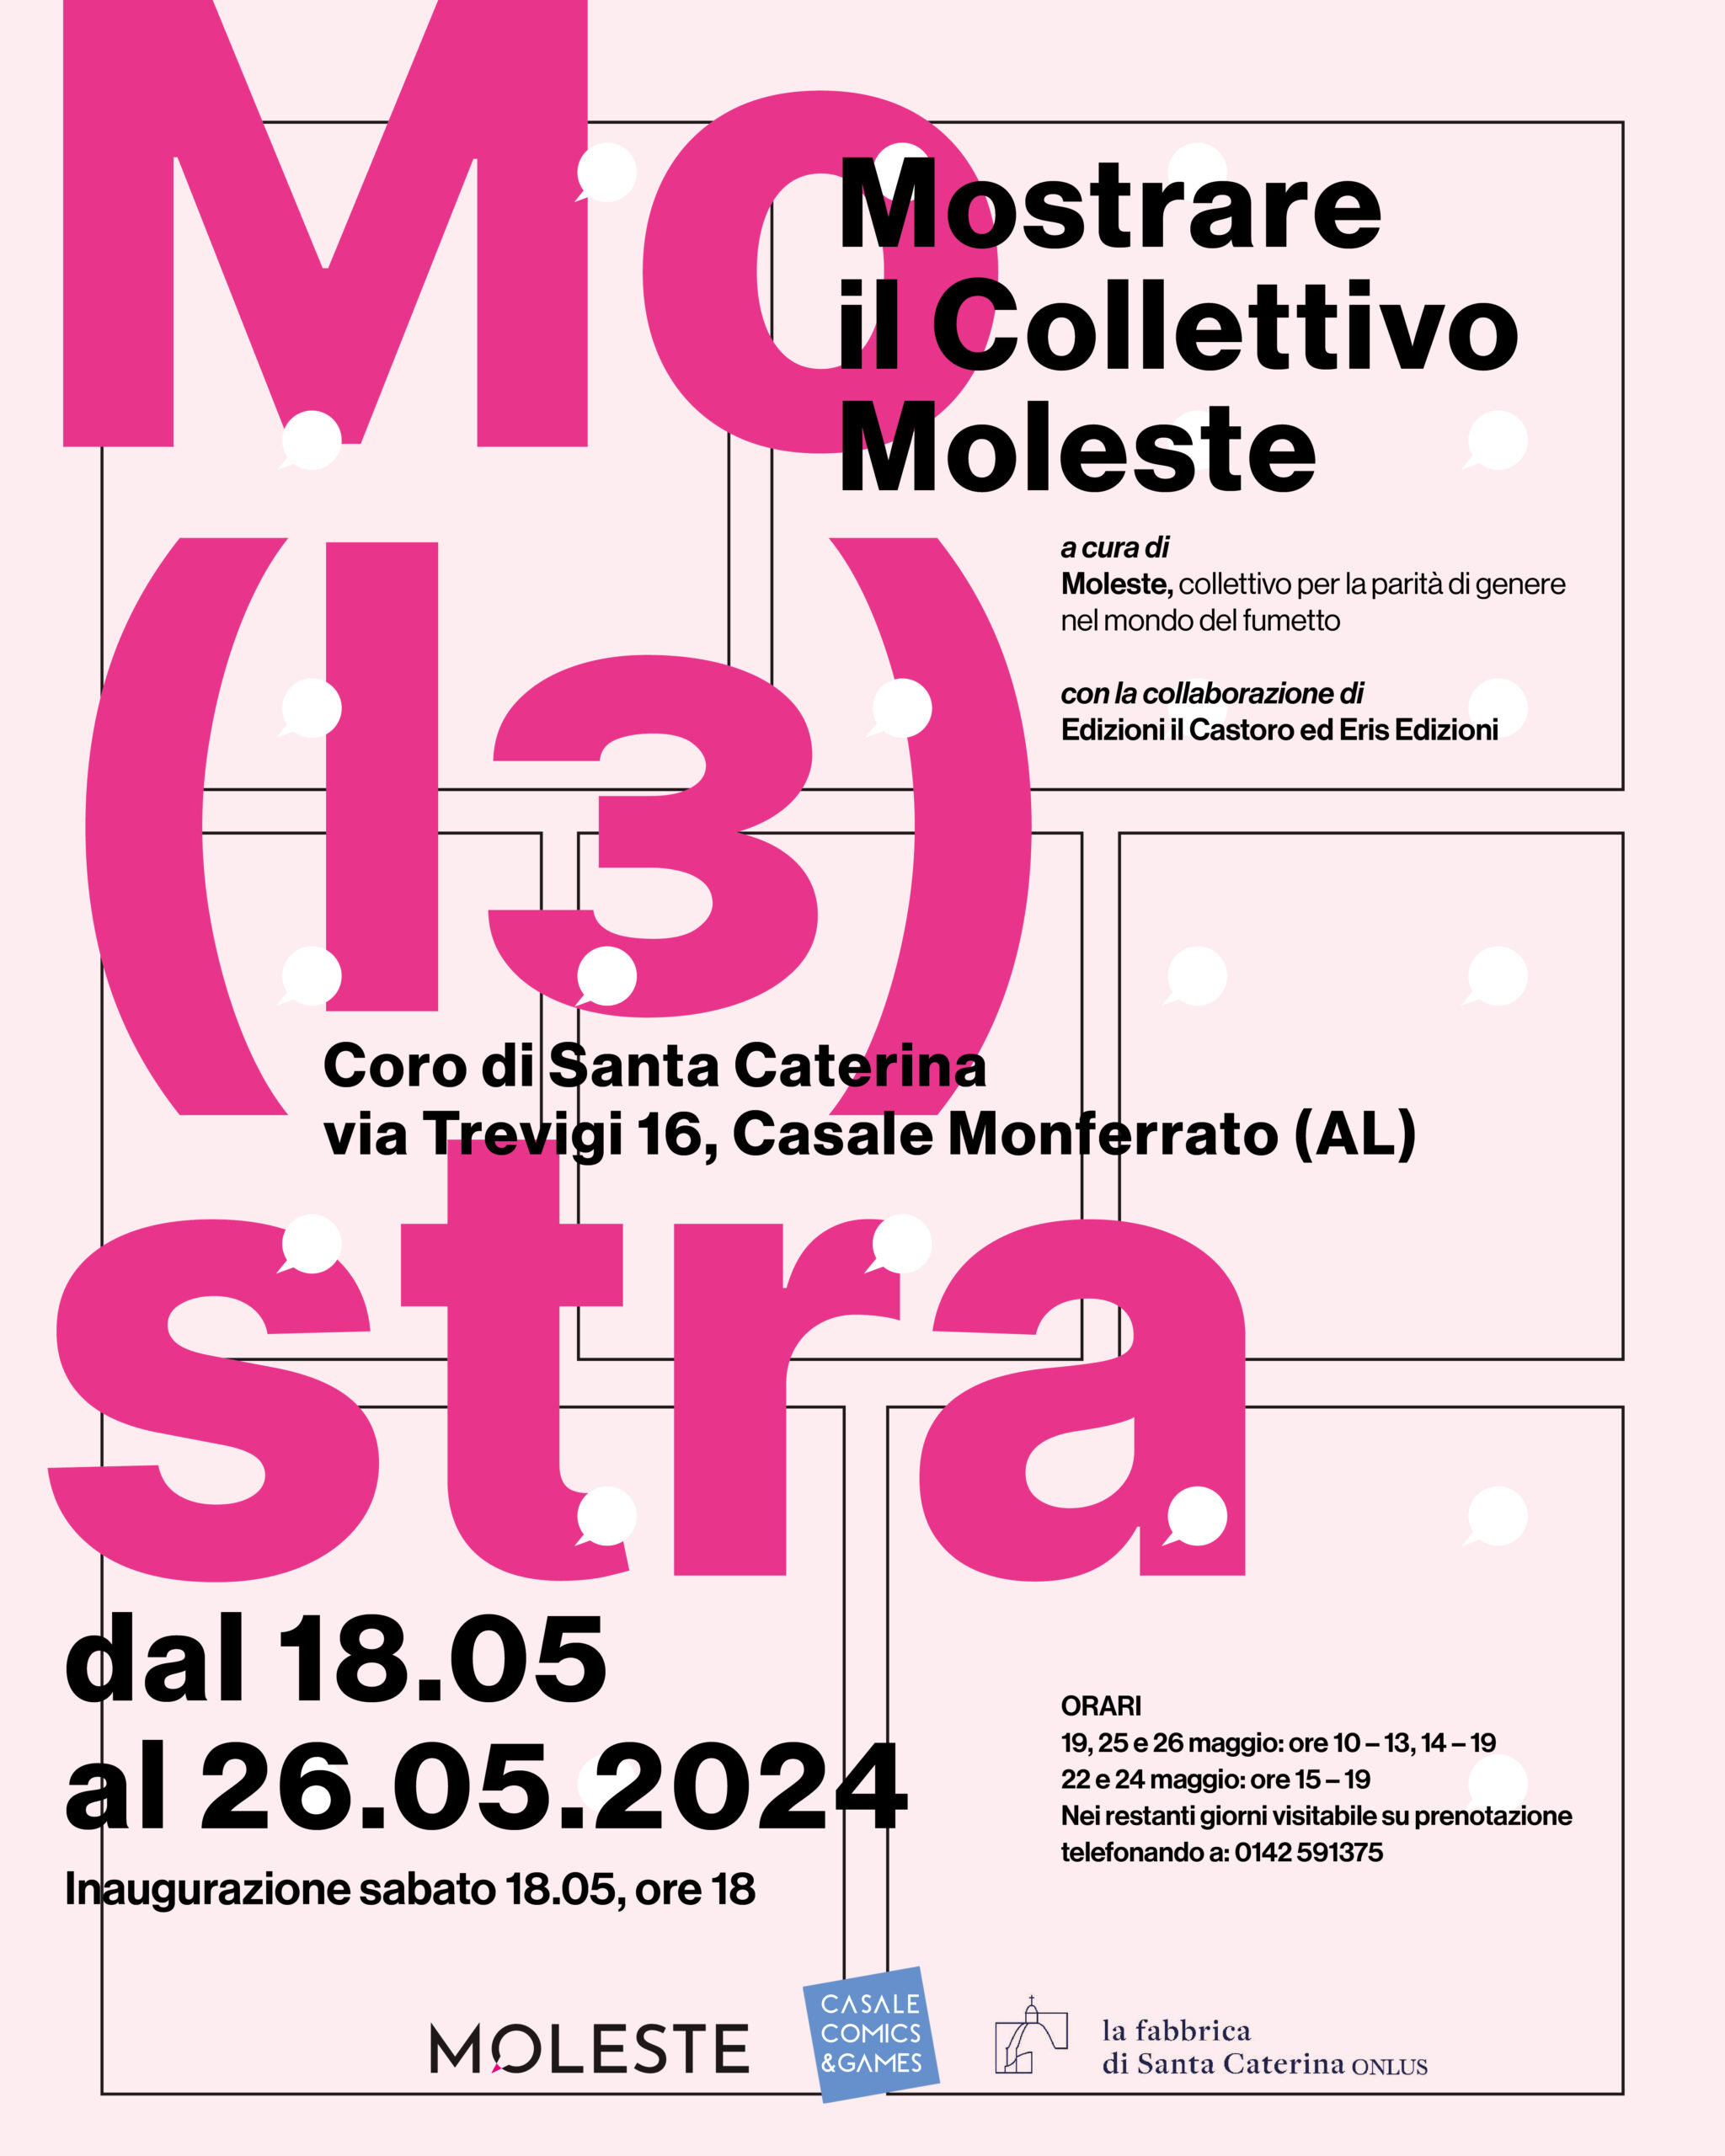 Three exhibitions in the most beautiful places of Casale Monferrato for CasaleComics